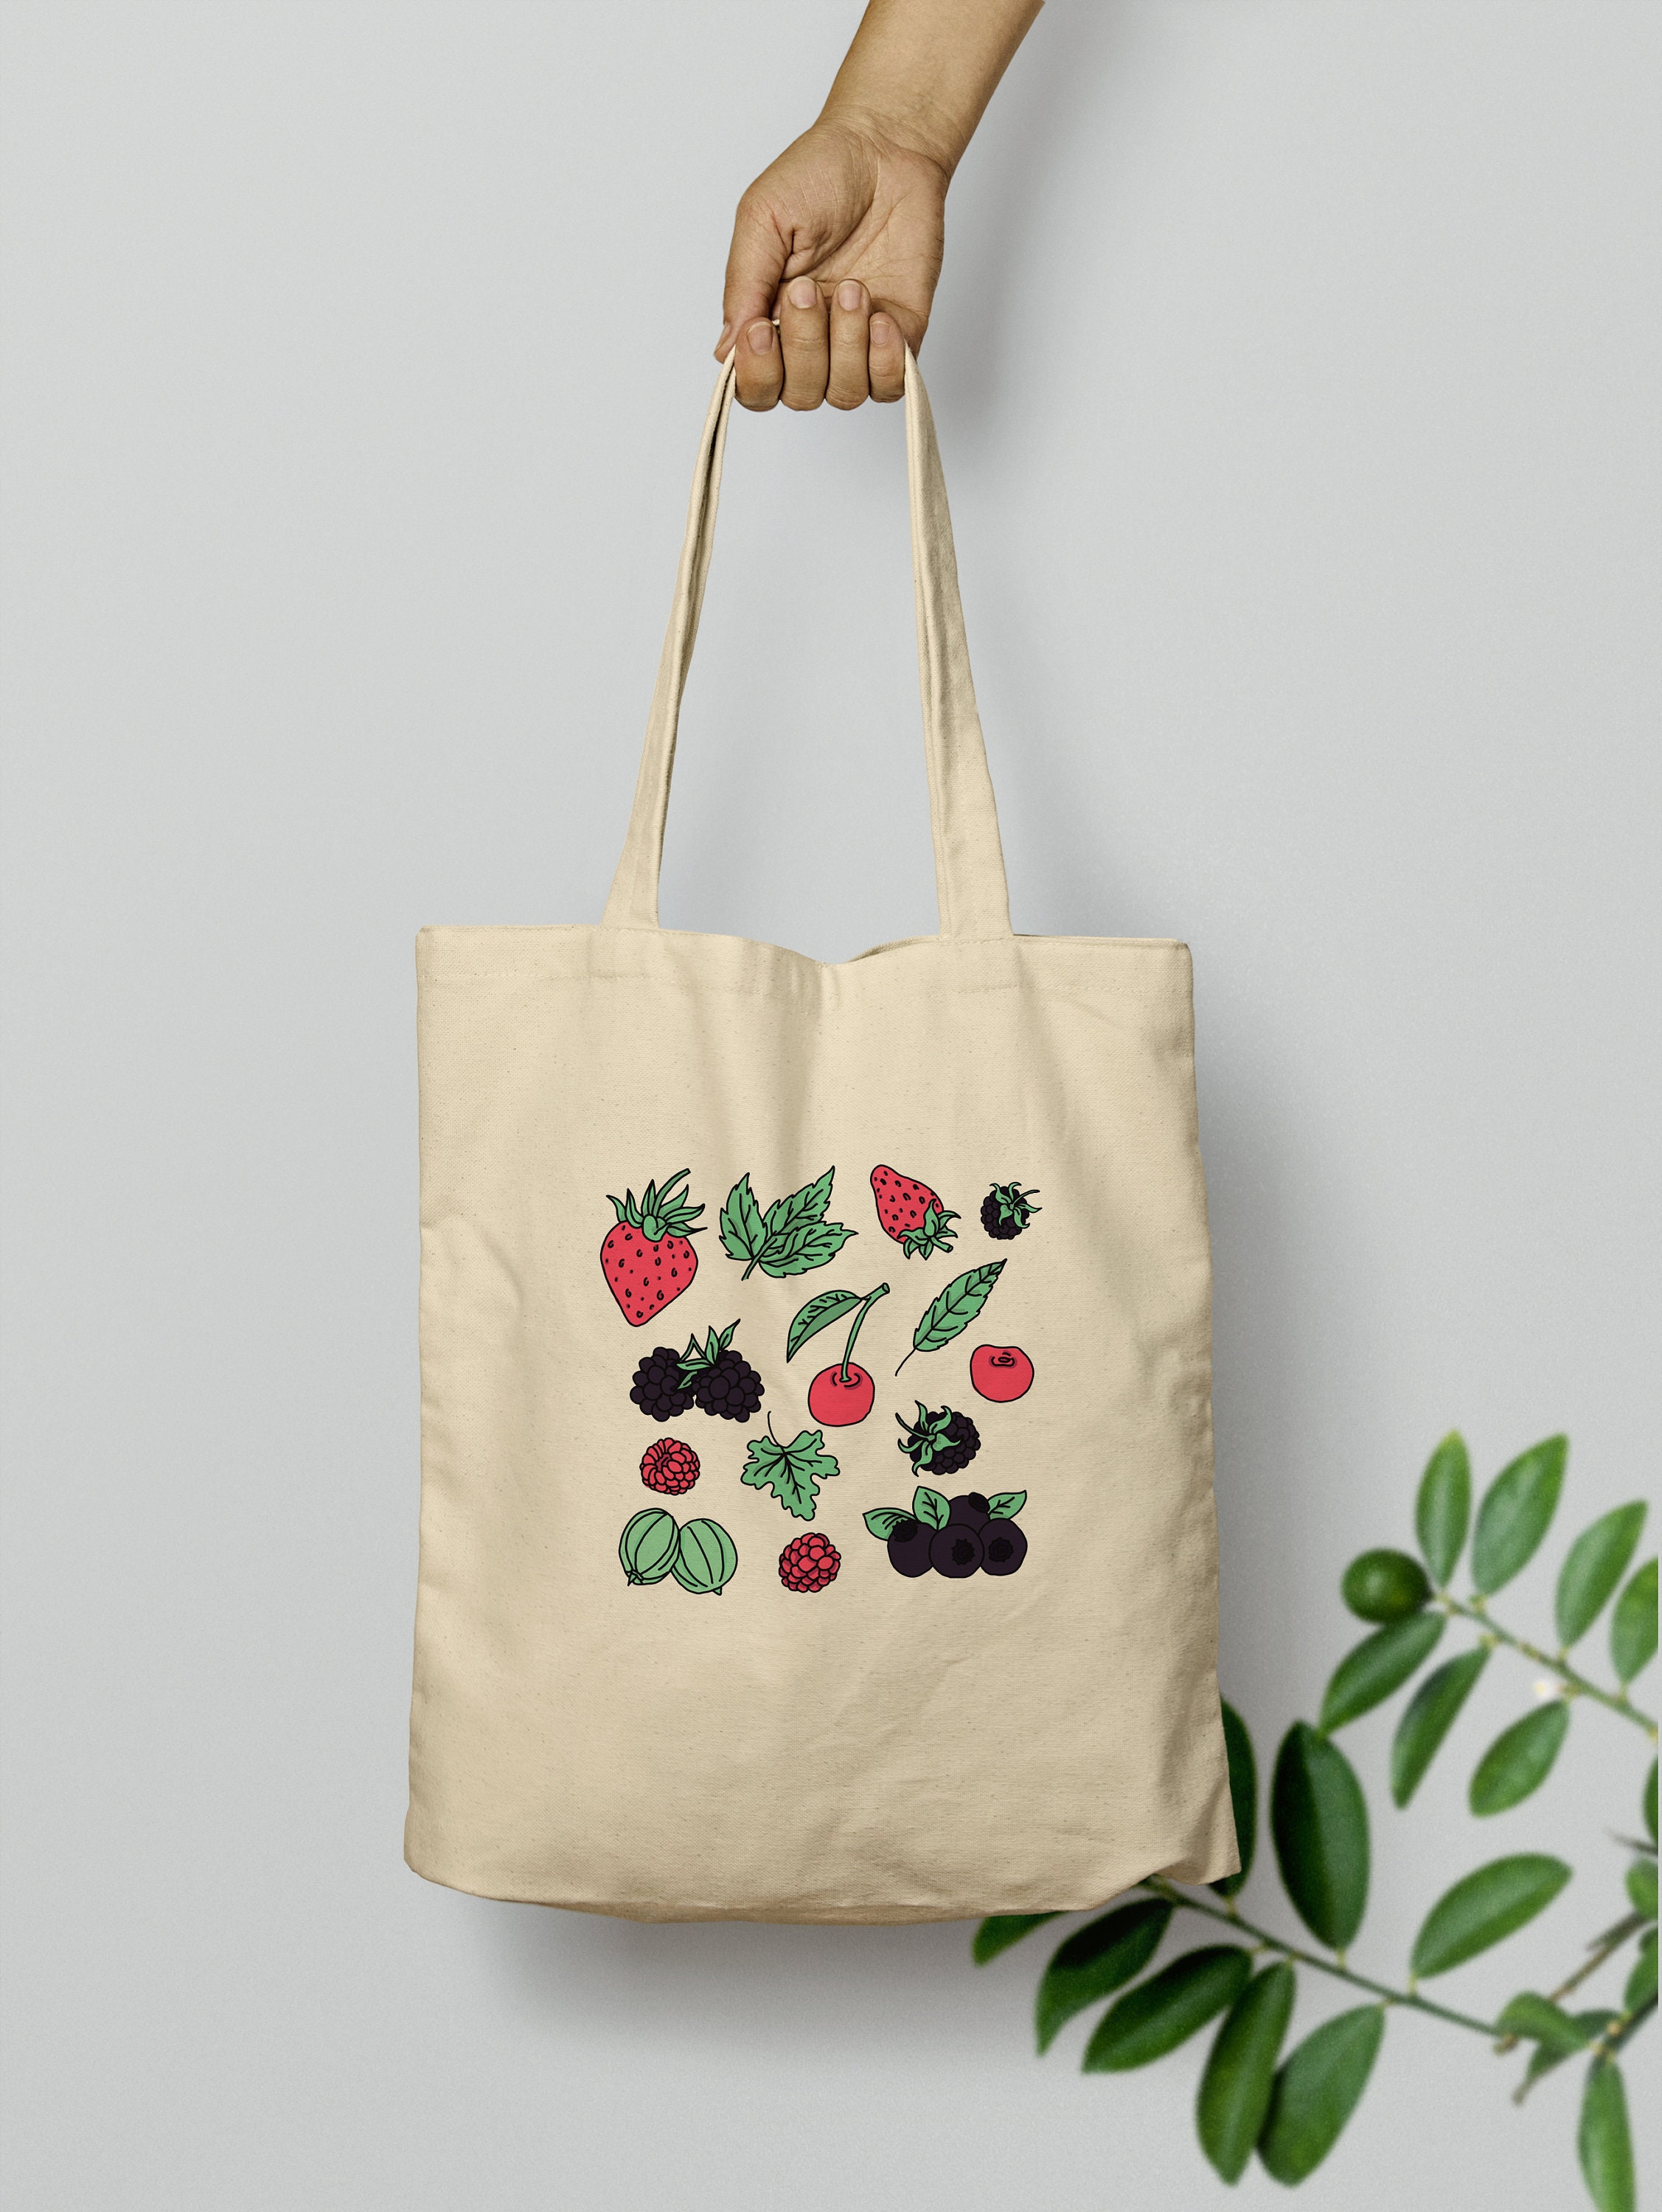 Fruit Tote Bag Berry Tote Nature Botanical Cotton Tote | Etsy